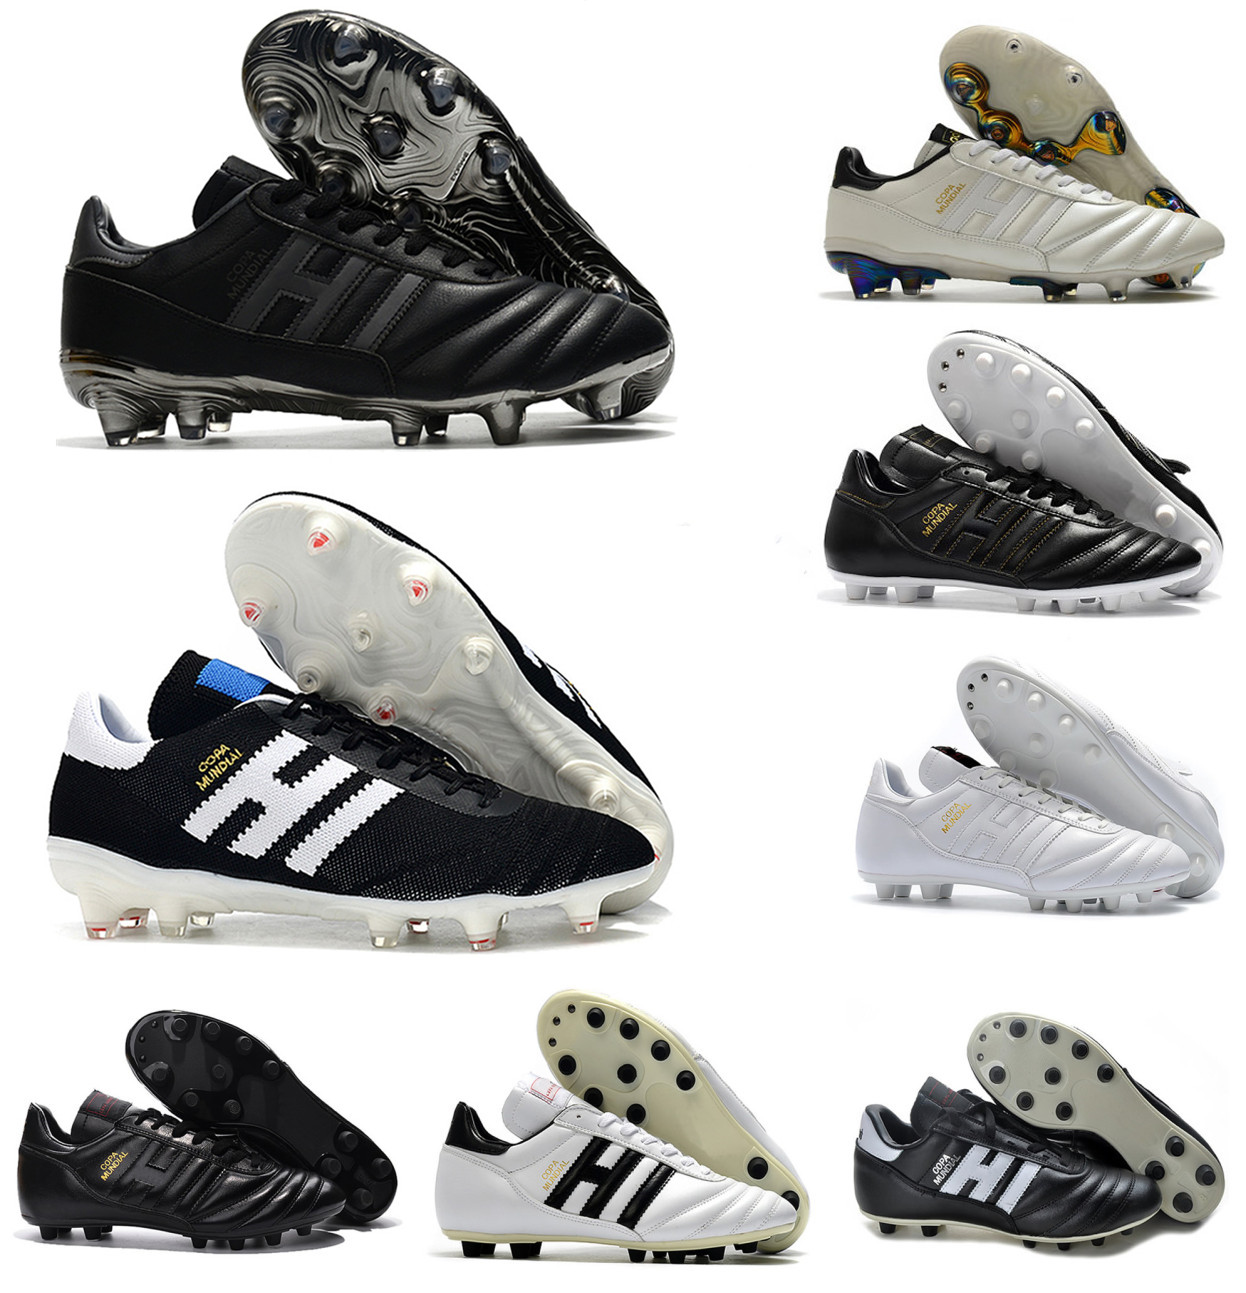 

New Classics Mens Soccer Shoes Copa Mundial 21 70Y Eternal Class FG Leather Football Boots futbol Cleats Size 39-45 Sports Sneakers, 3 copa 70y fg